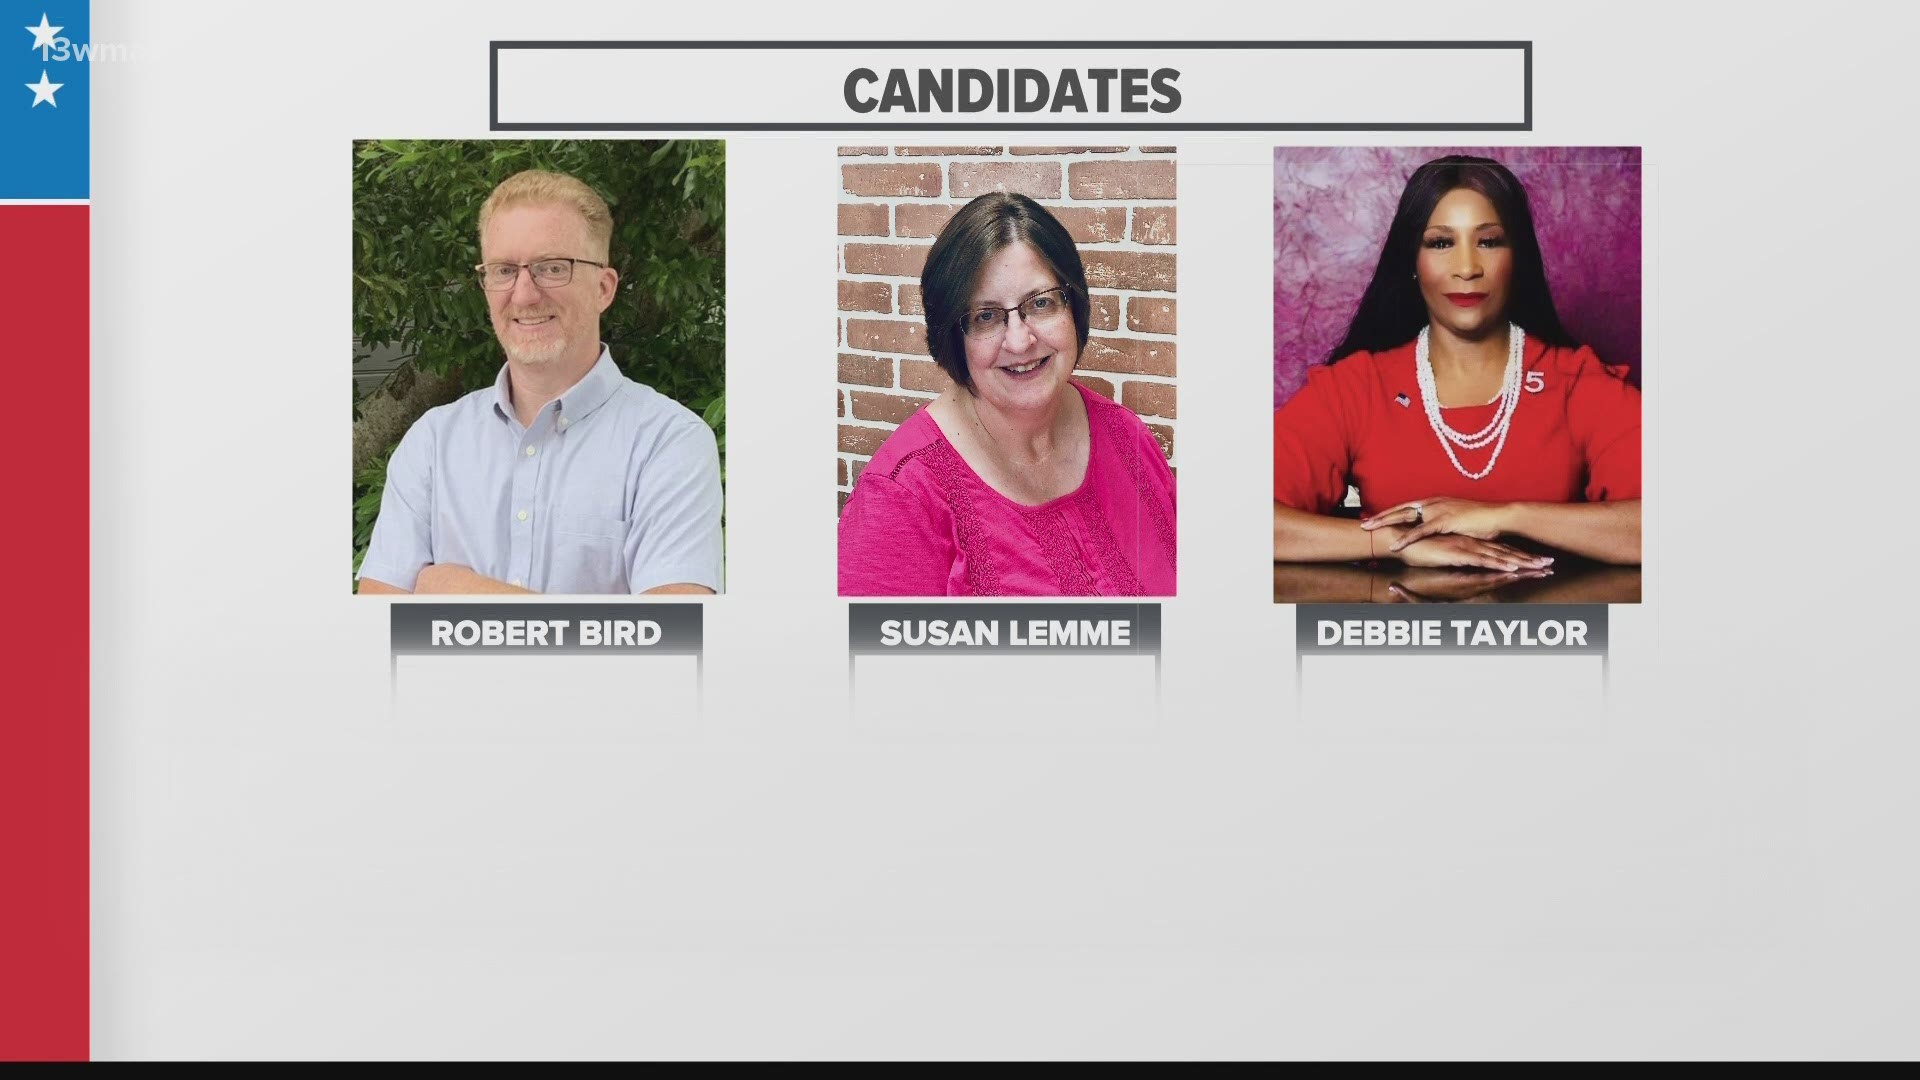 According to Andy Holland with the Houston County Board of Elections, Robert Bird will face Debbie Taylor in a runoff.